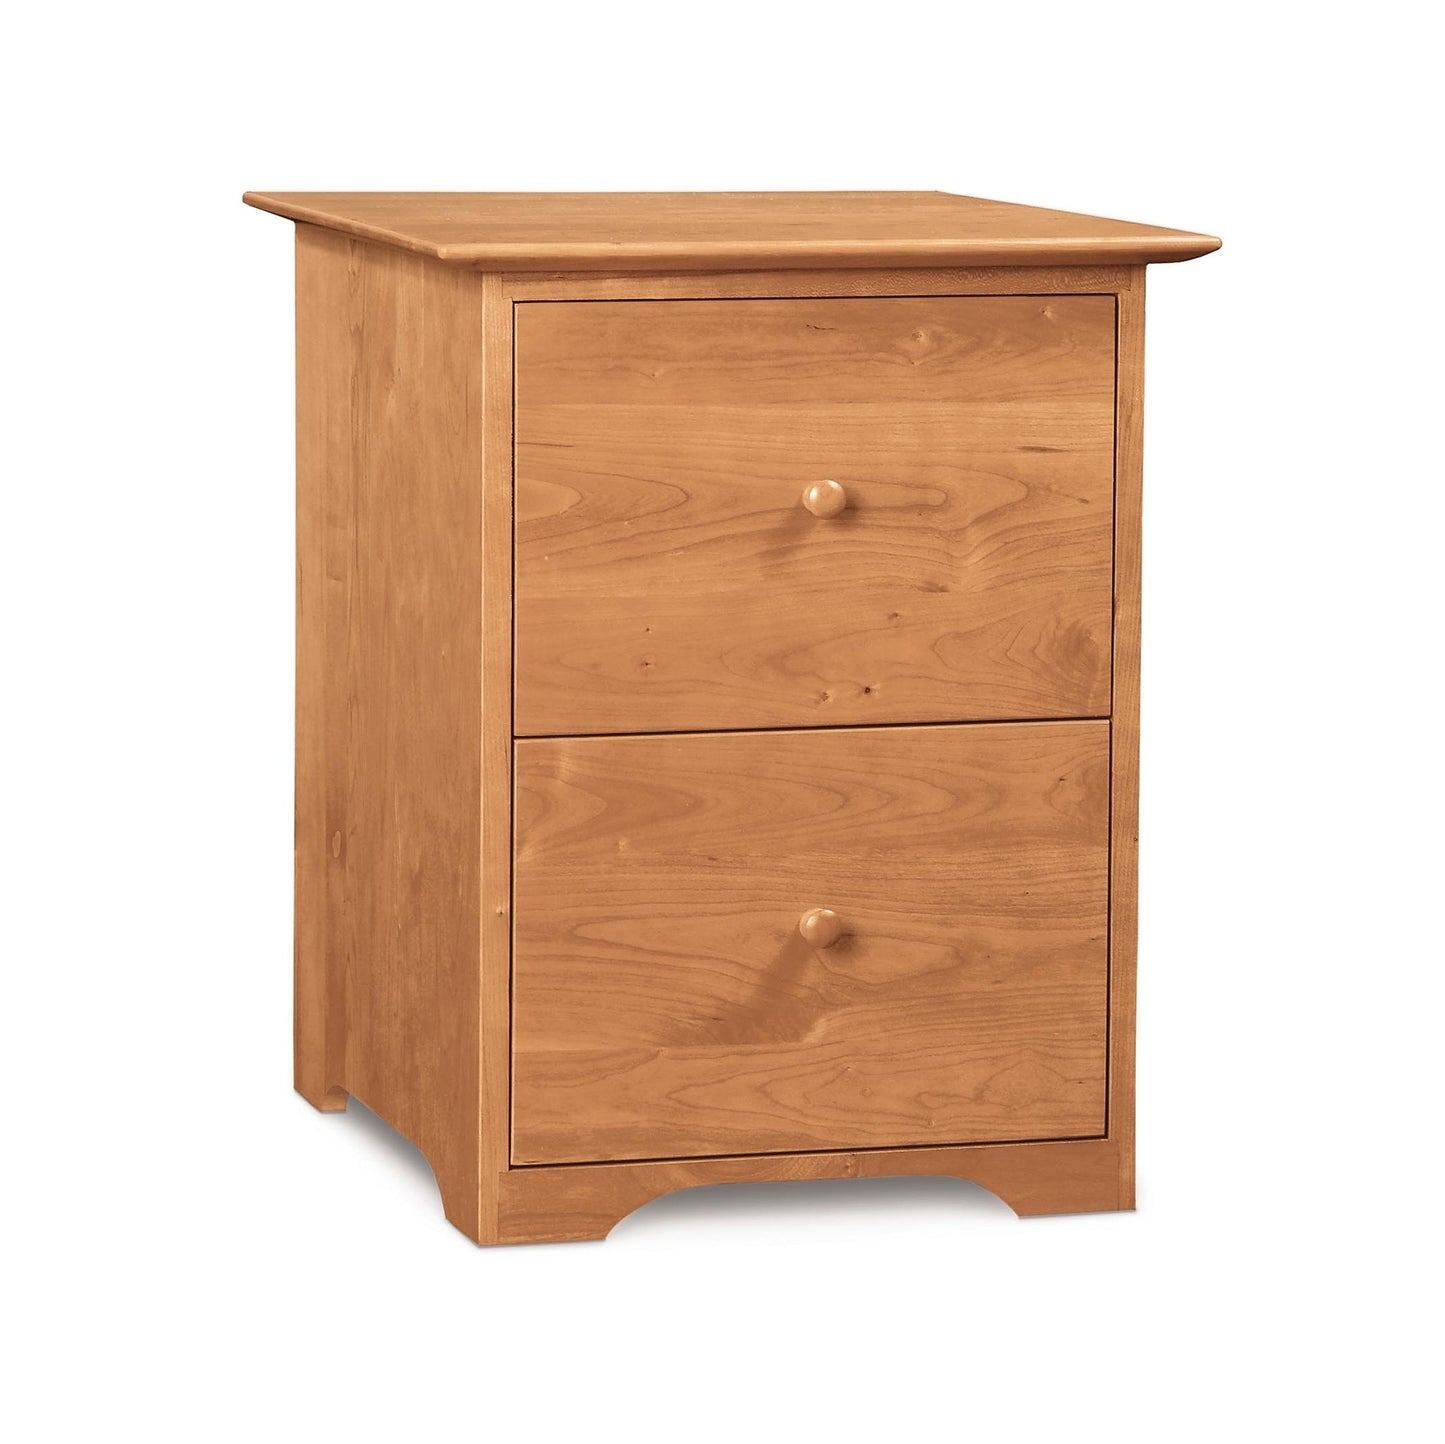 A wooden filing cabinet with two drawers.